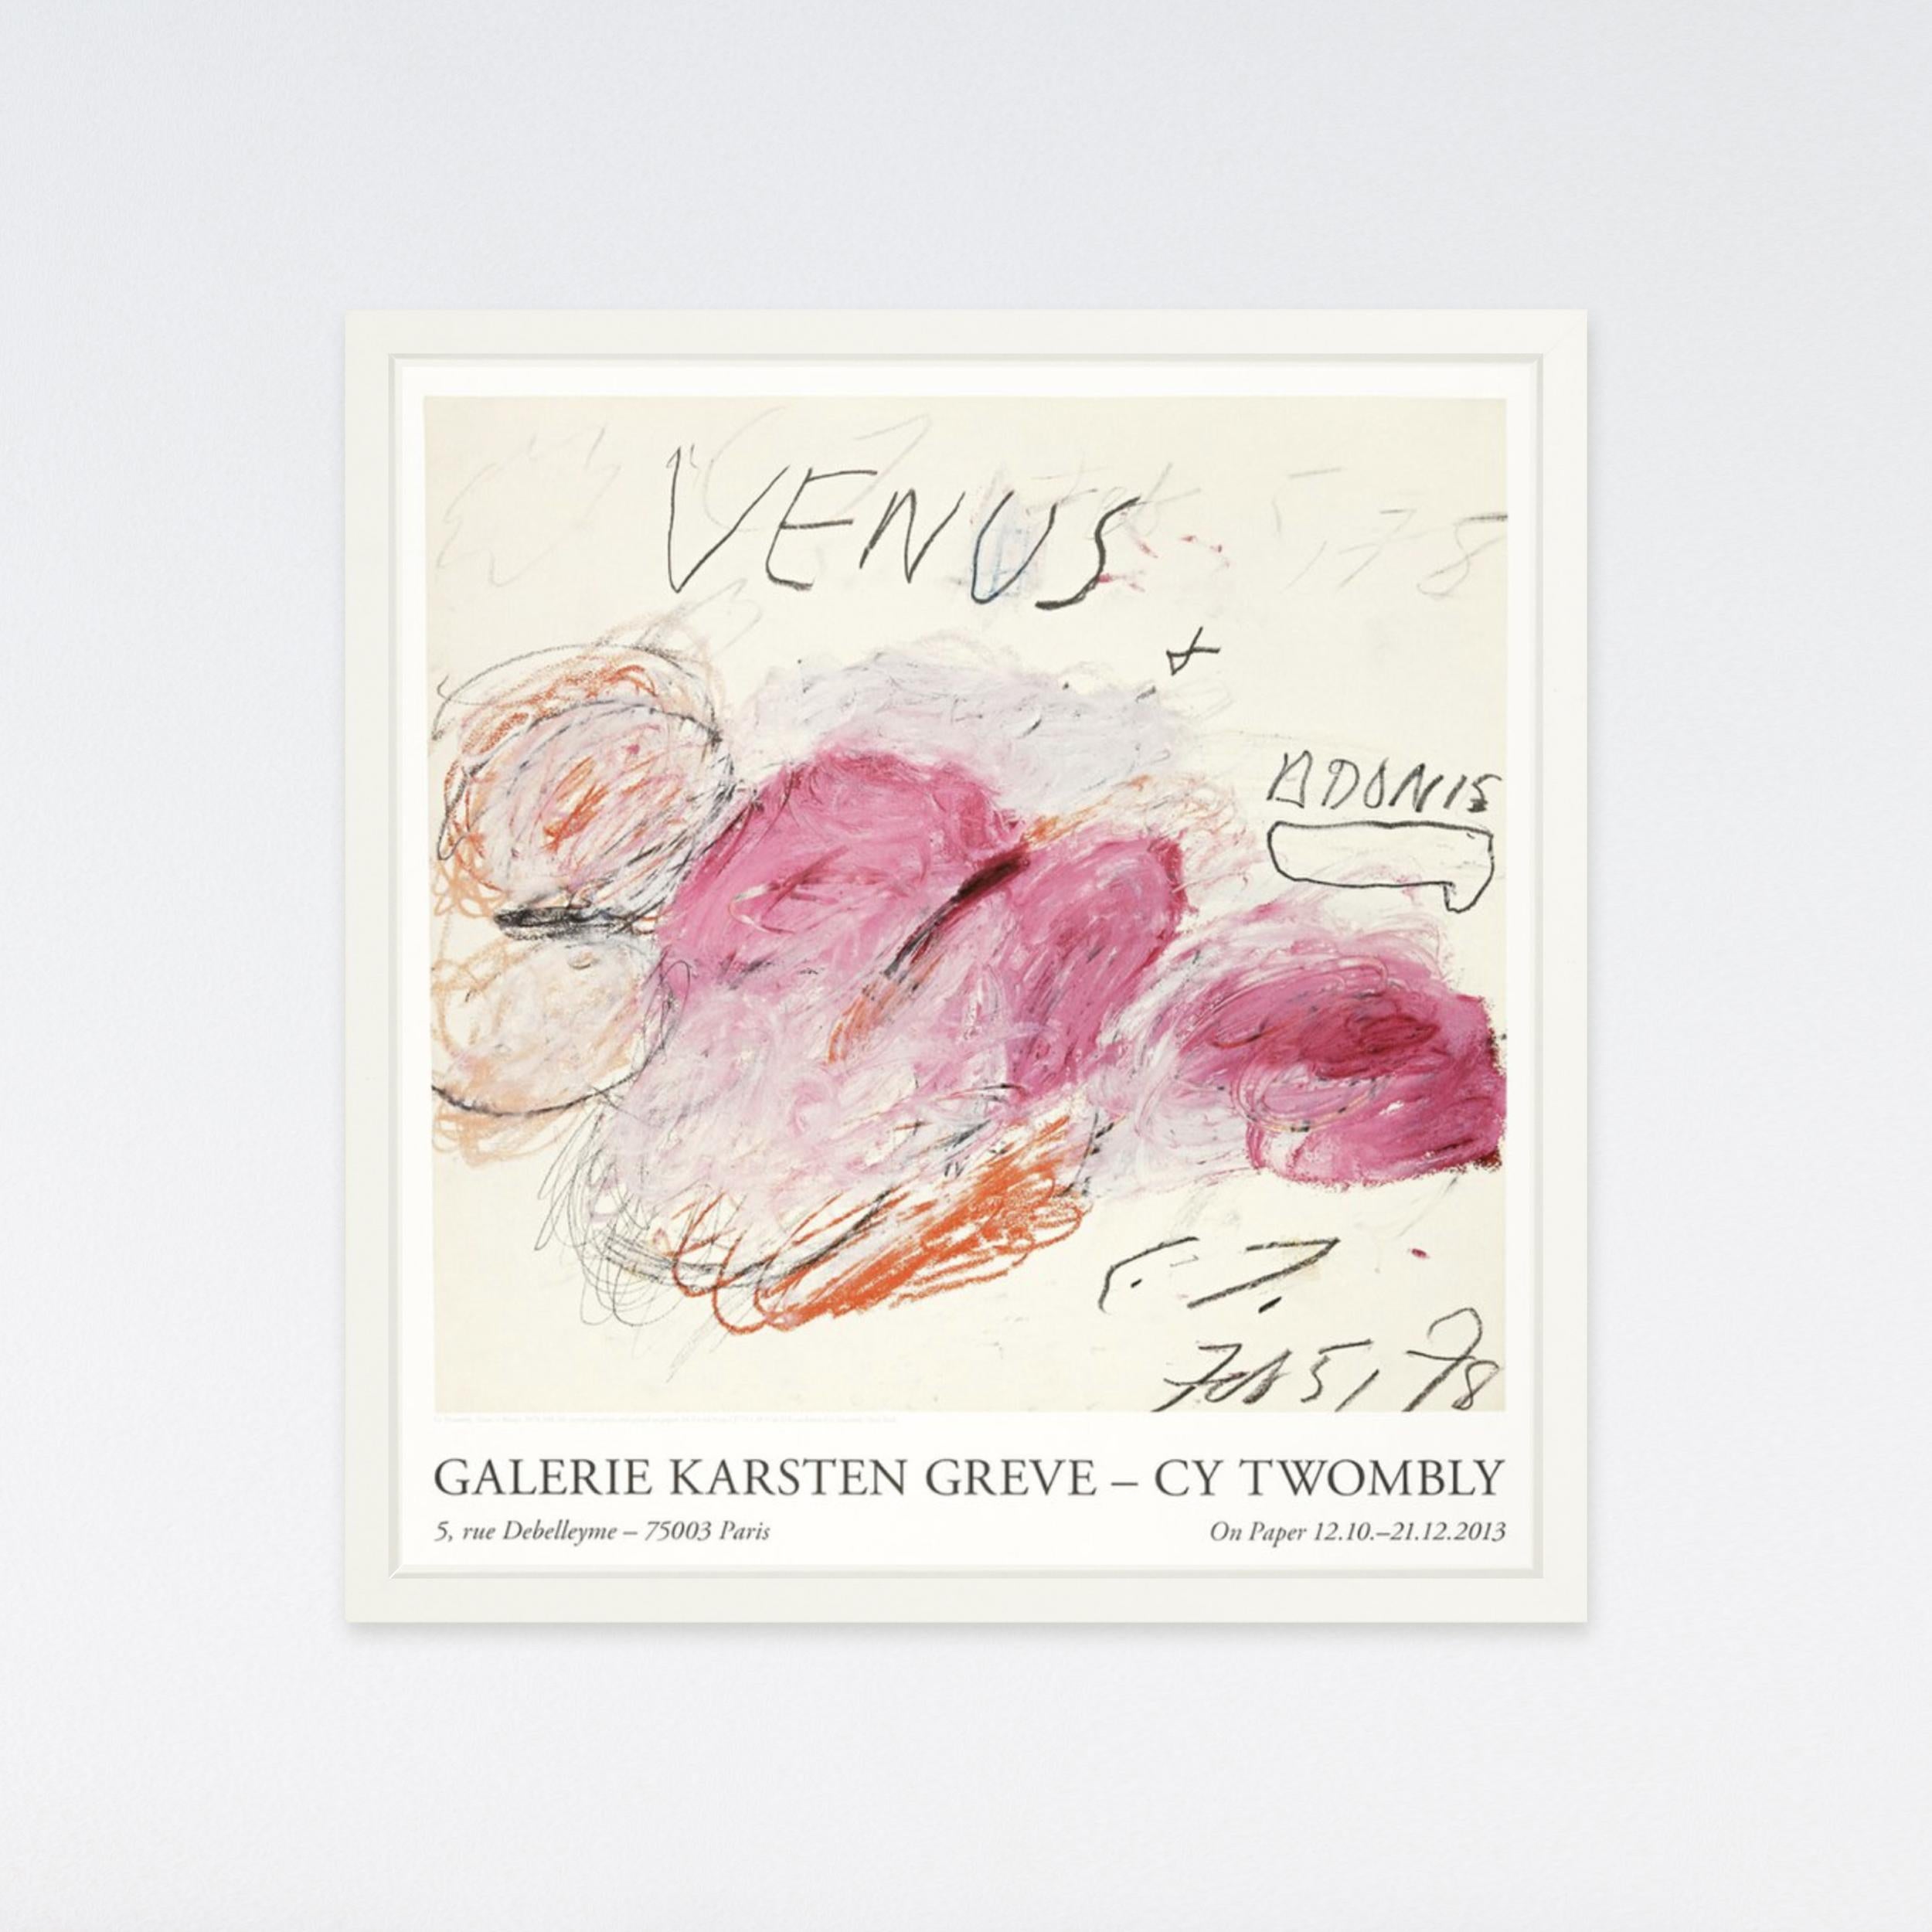 Cy Twombly, Venus + Adonis - On Paper,  2013 Exhibition Poster - American Modern Print by (after) Cy Twombly